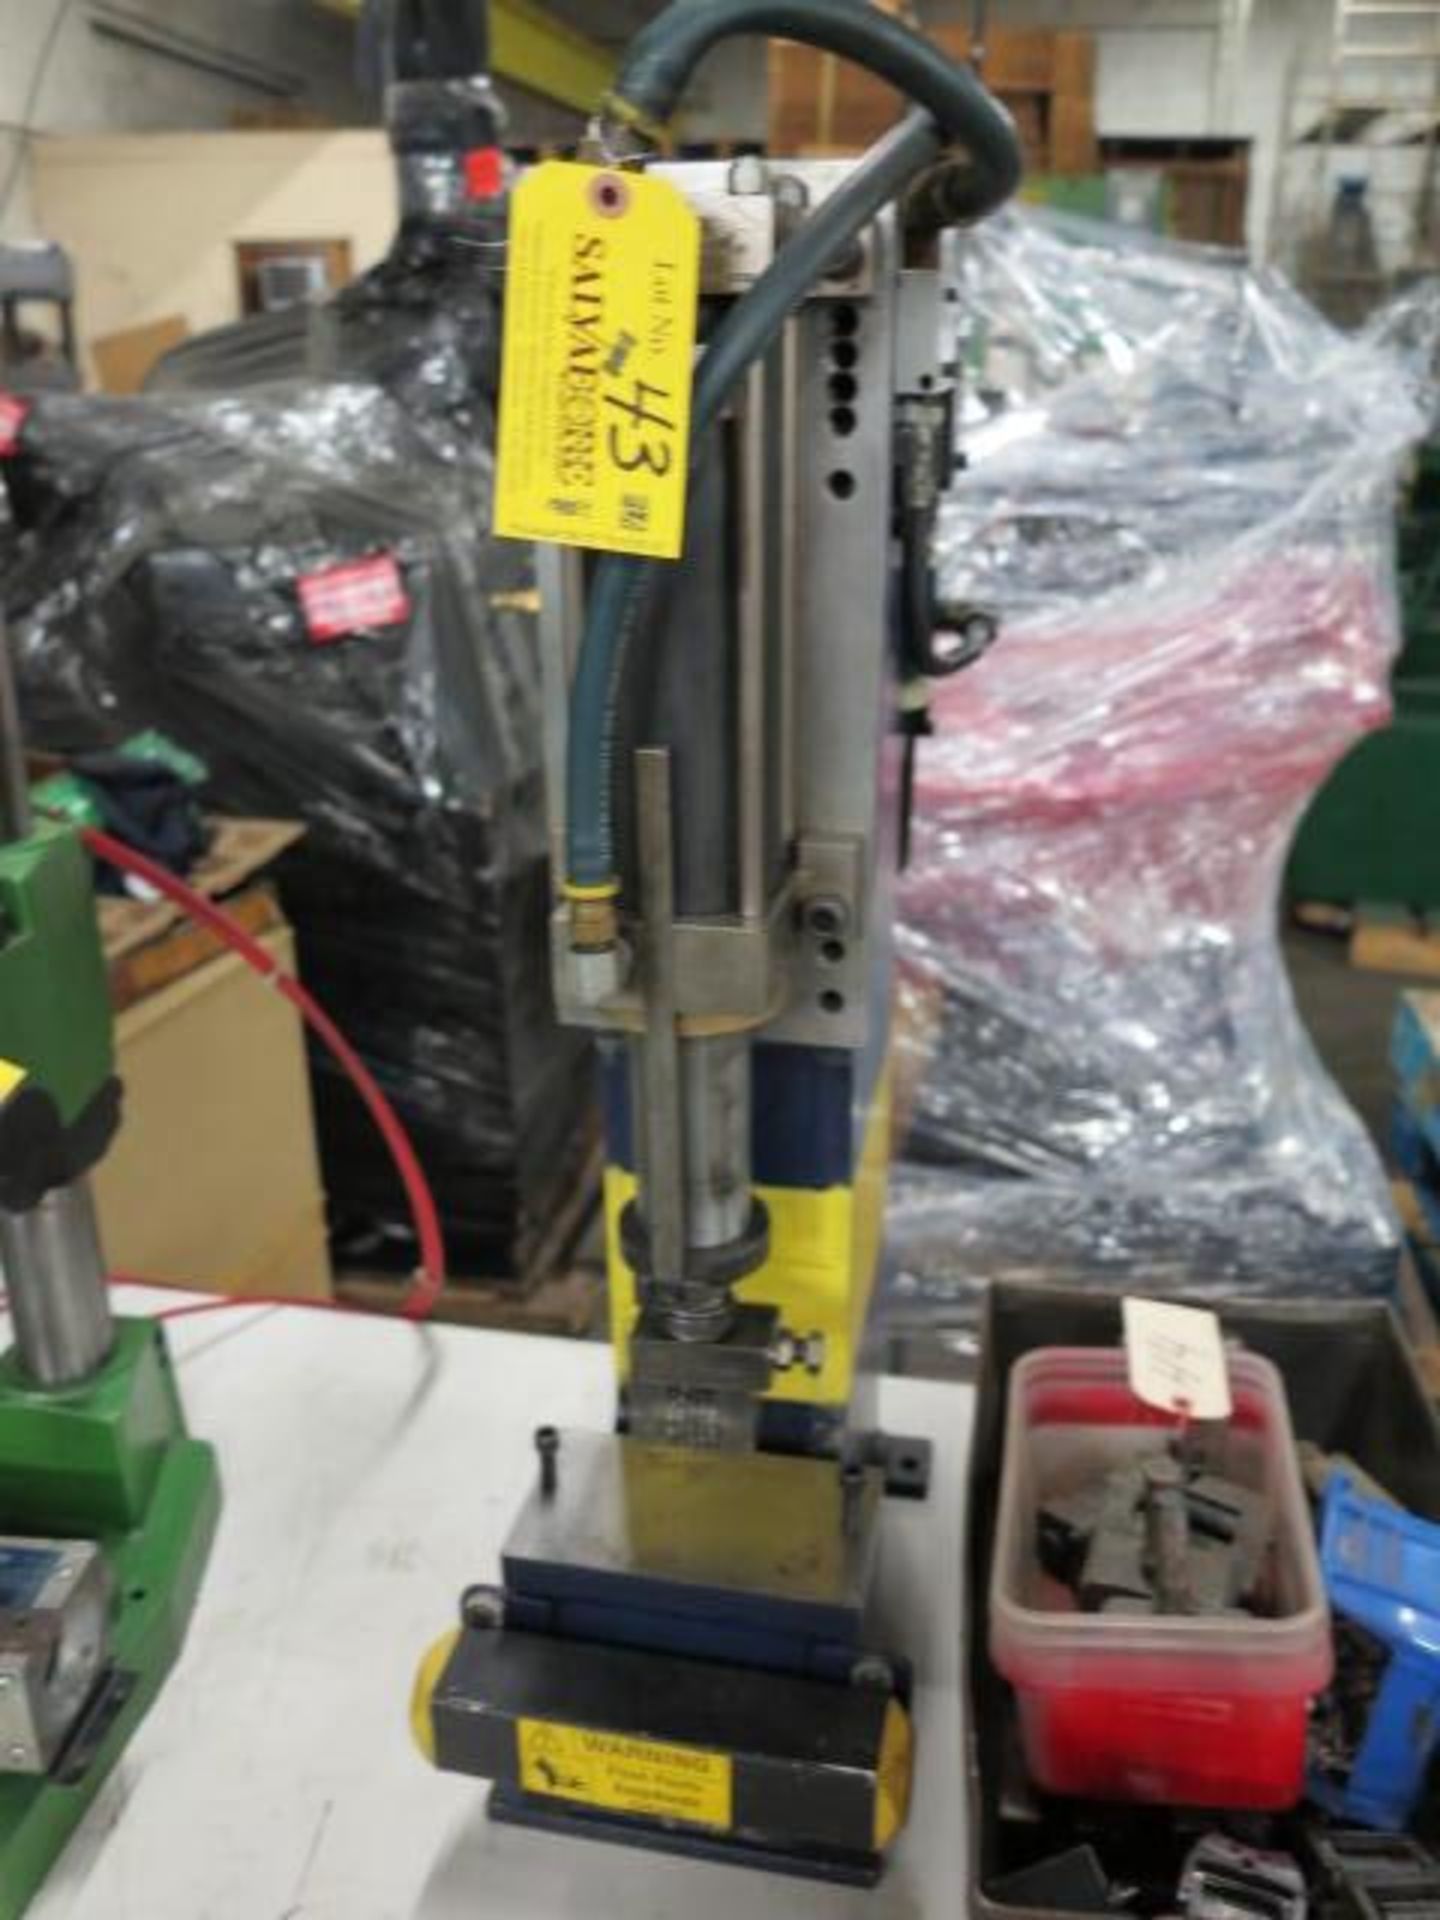 CMT Pneumatic Indent Marking Machine, S/N AH6912 with 2 Hand Controls and Numbering Head